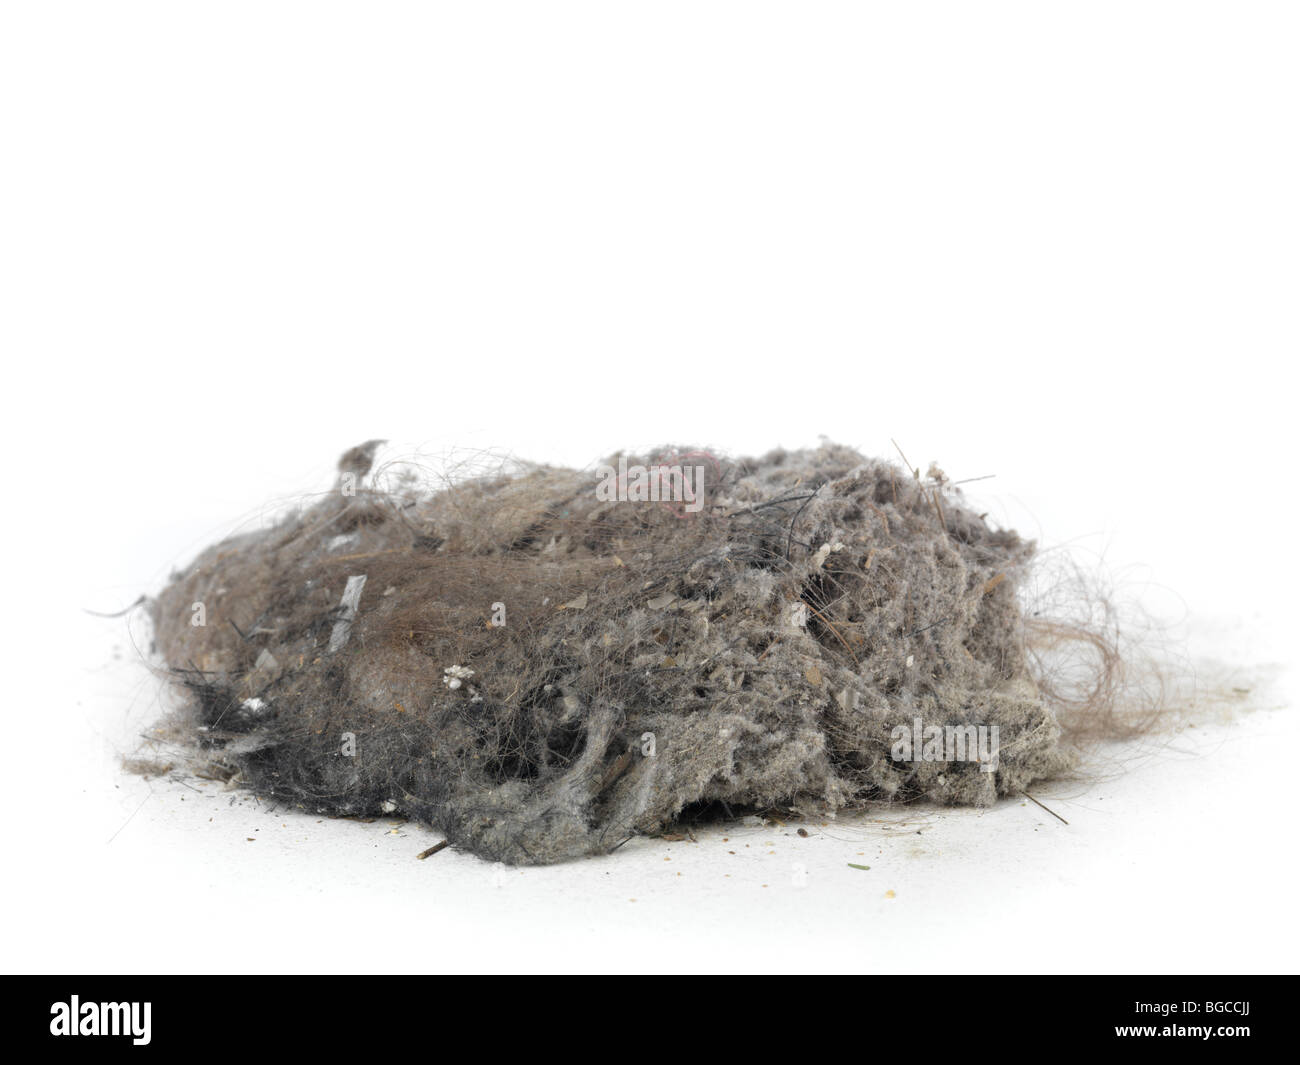 Pile of dust and hairs collected with a vacuum cleaner isolated on white background Stock Photo